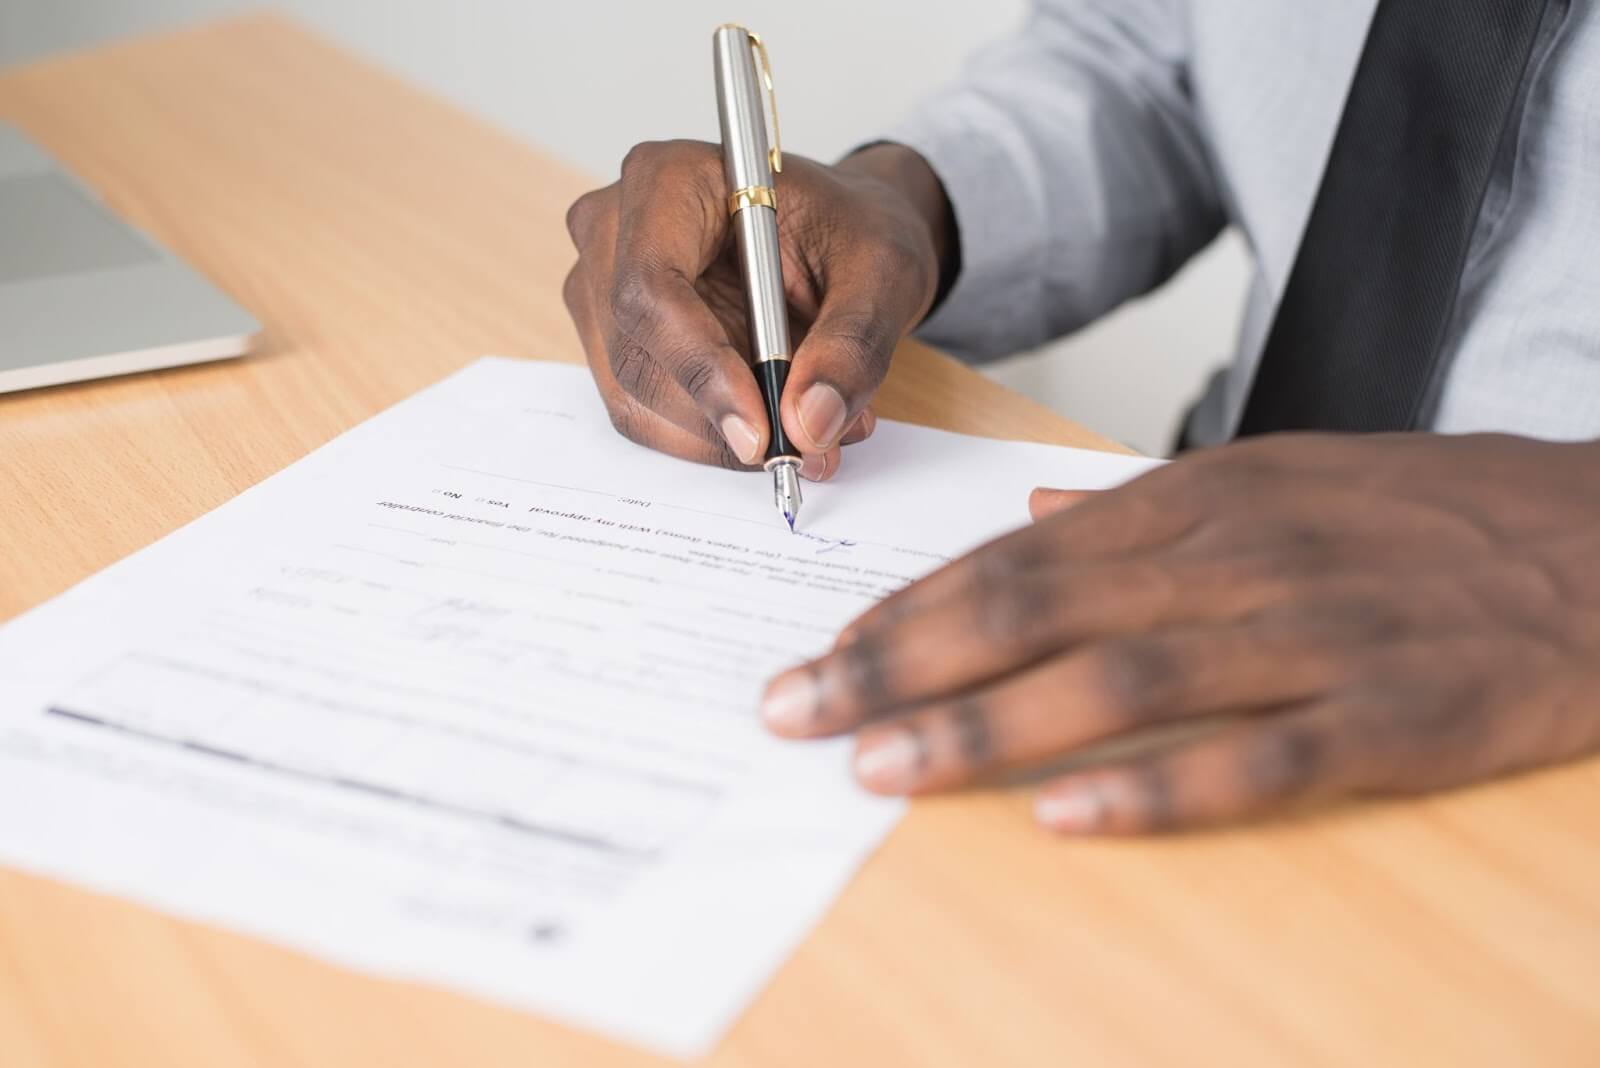 Man filling out application with pen on paper